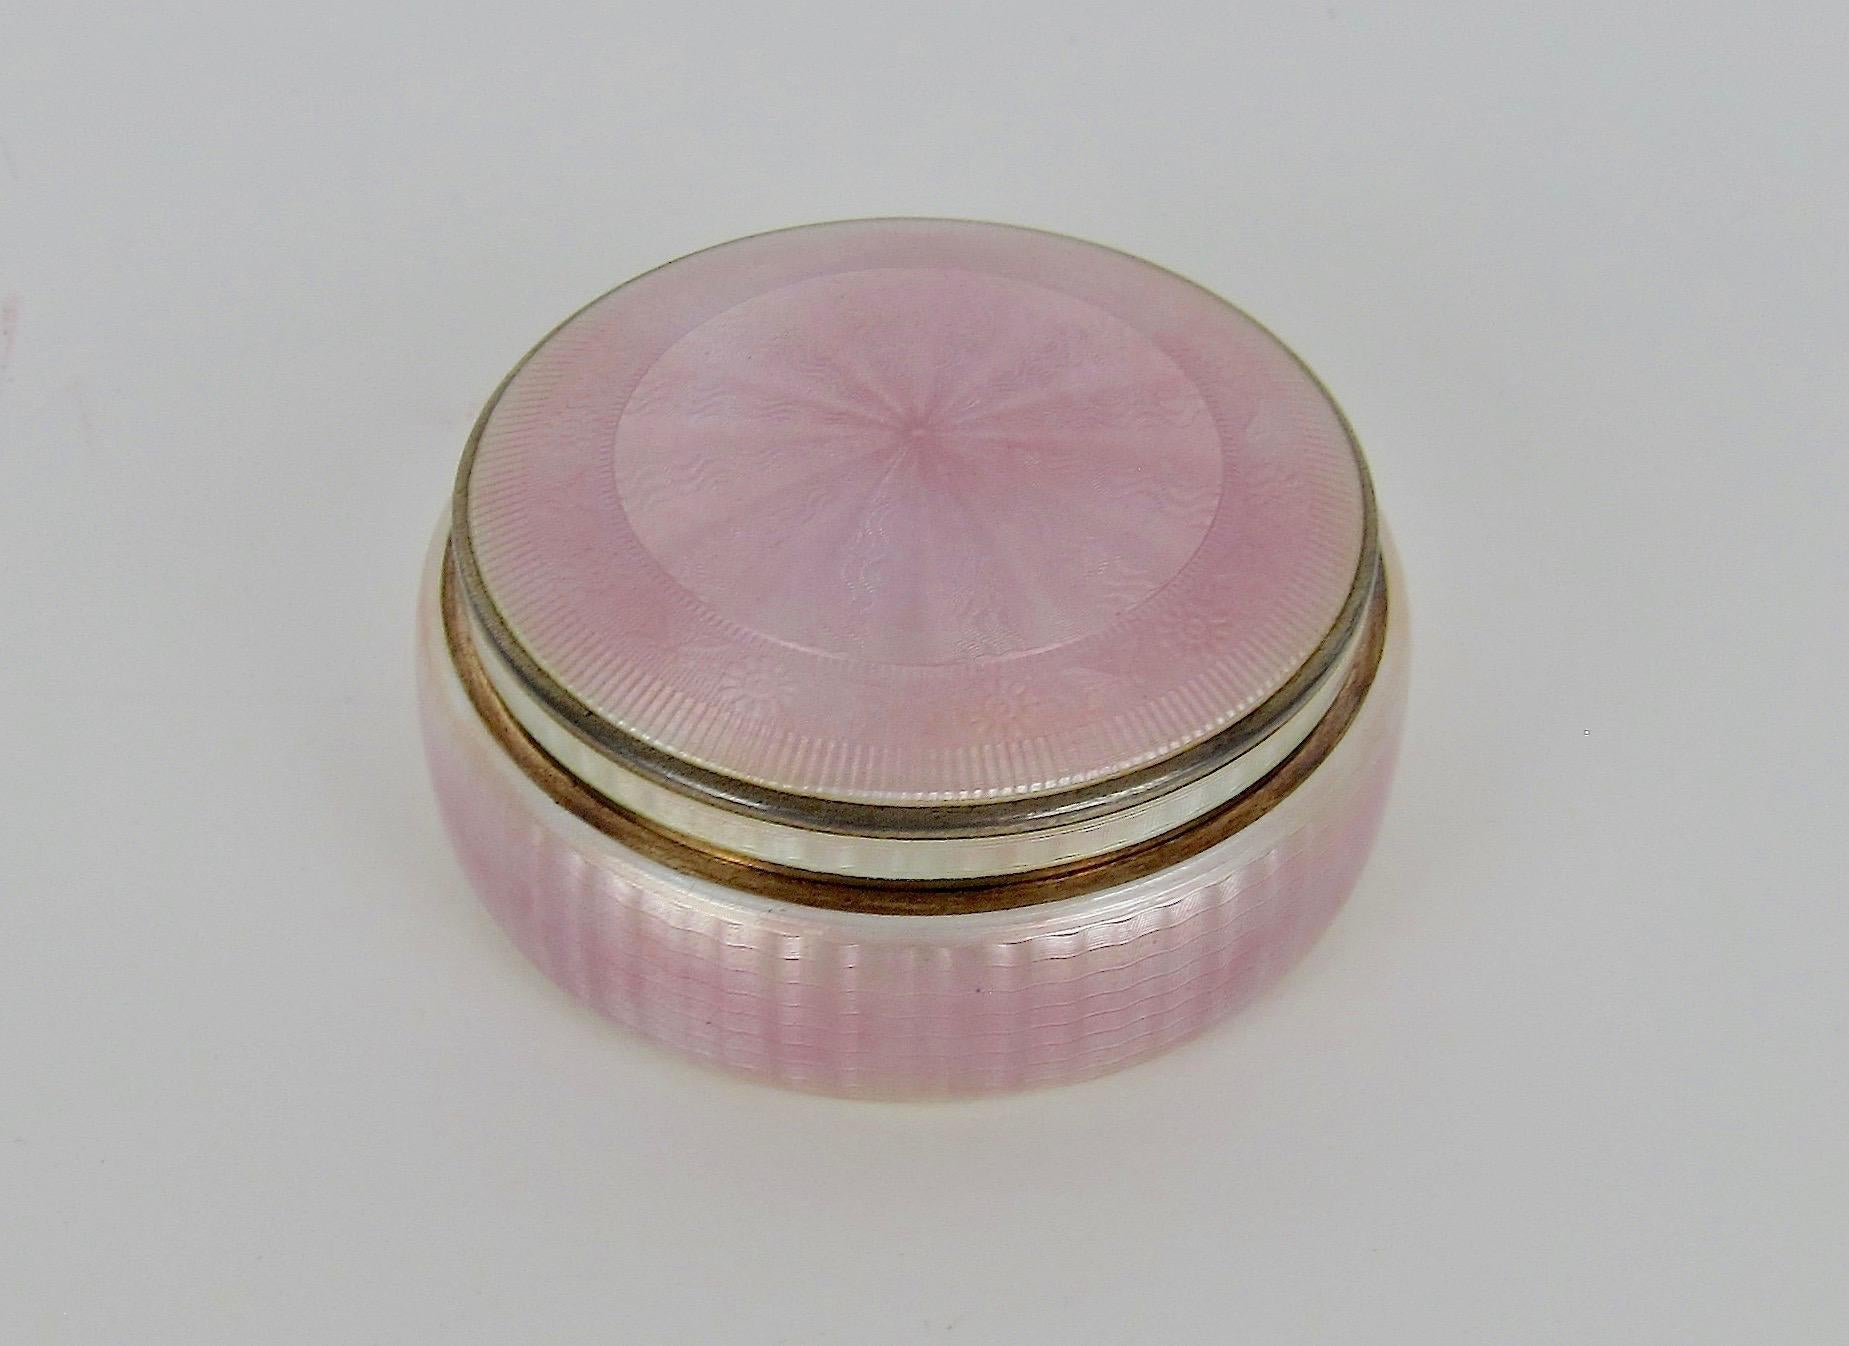 Edwardian David Andersen Sterling Silver Gilt and Pink Guilloche Enamel Covered Box